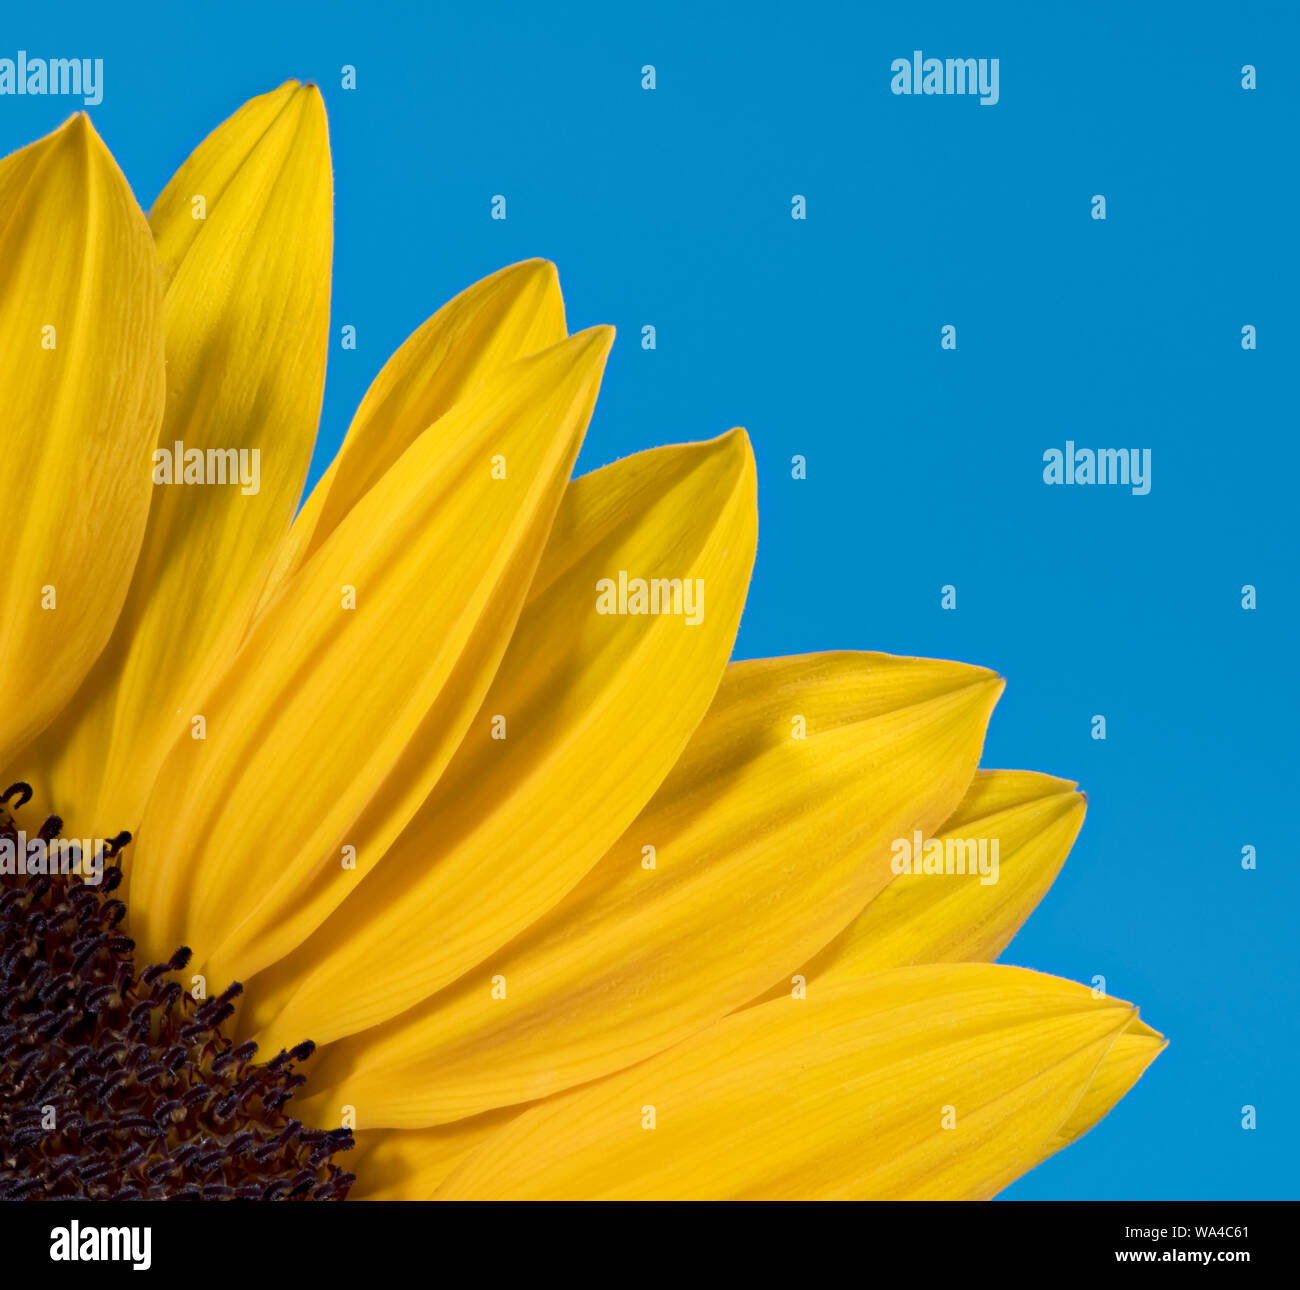 Creative photograph of part of a bright yellow Sunflower photographed against a blue background. Looks like a sun rising Stock Photo